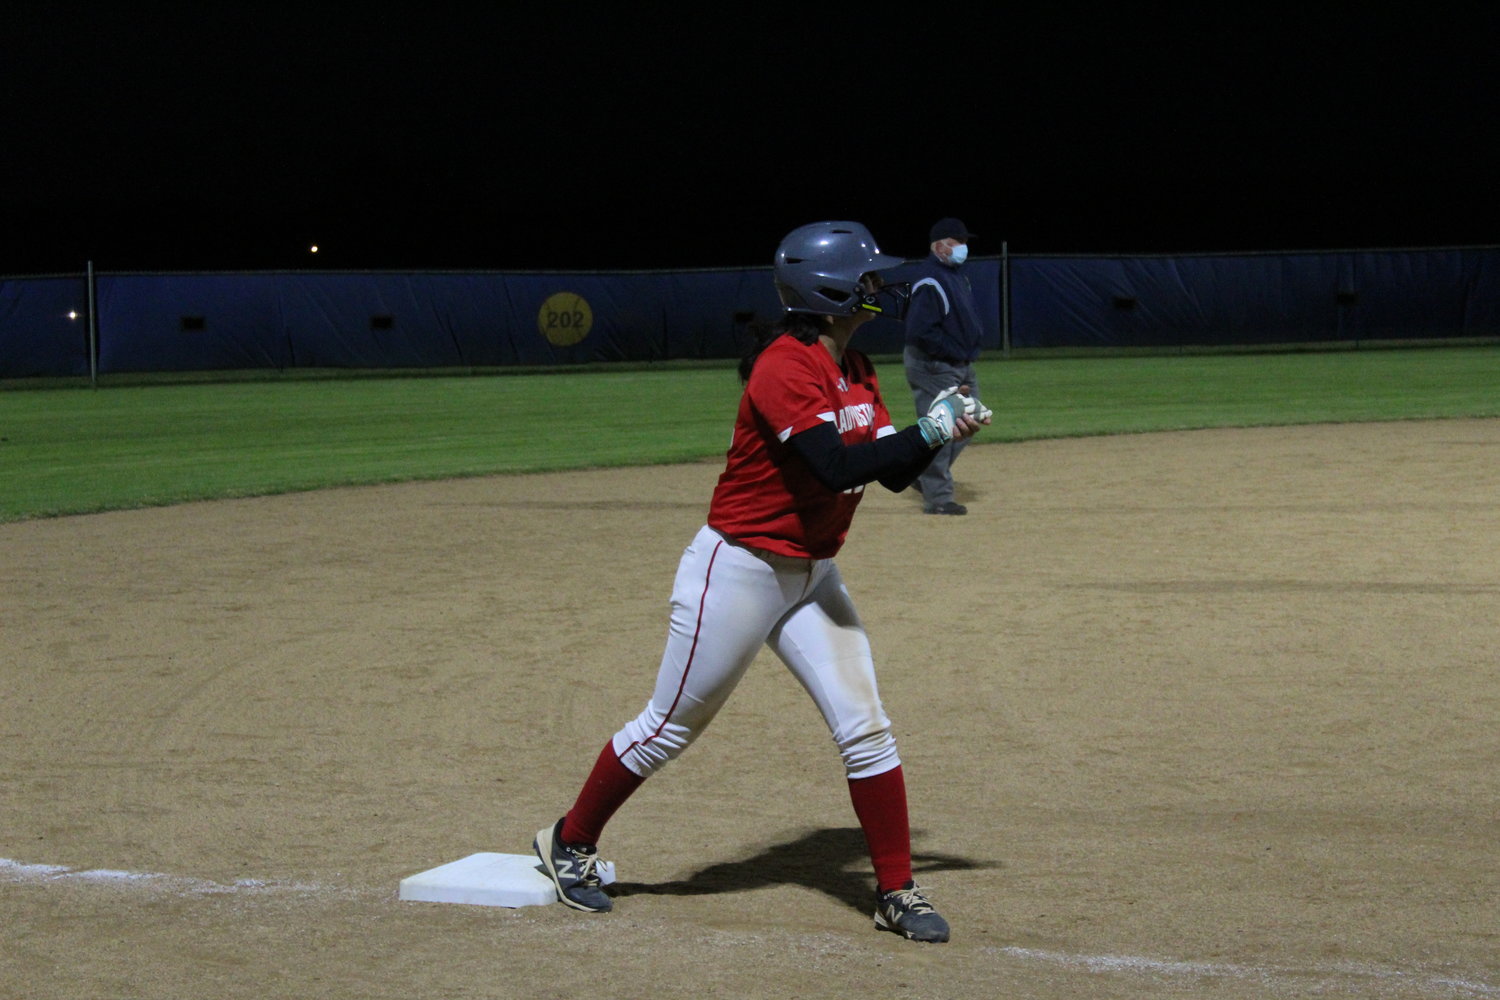 Kendall Amaya takes her lead off third base during Friday night’s game against Gonzales. In addition to her work on the basepaths, Amaya pitched a complete game in the Lady Mustangs’ 21-8 win.